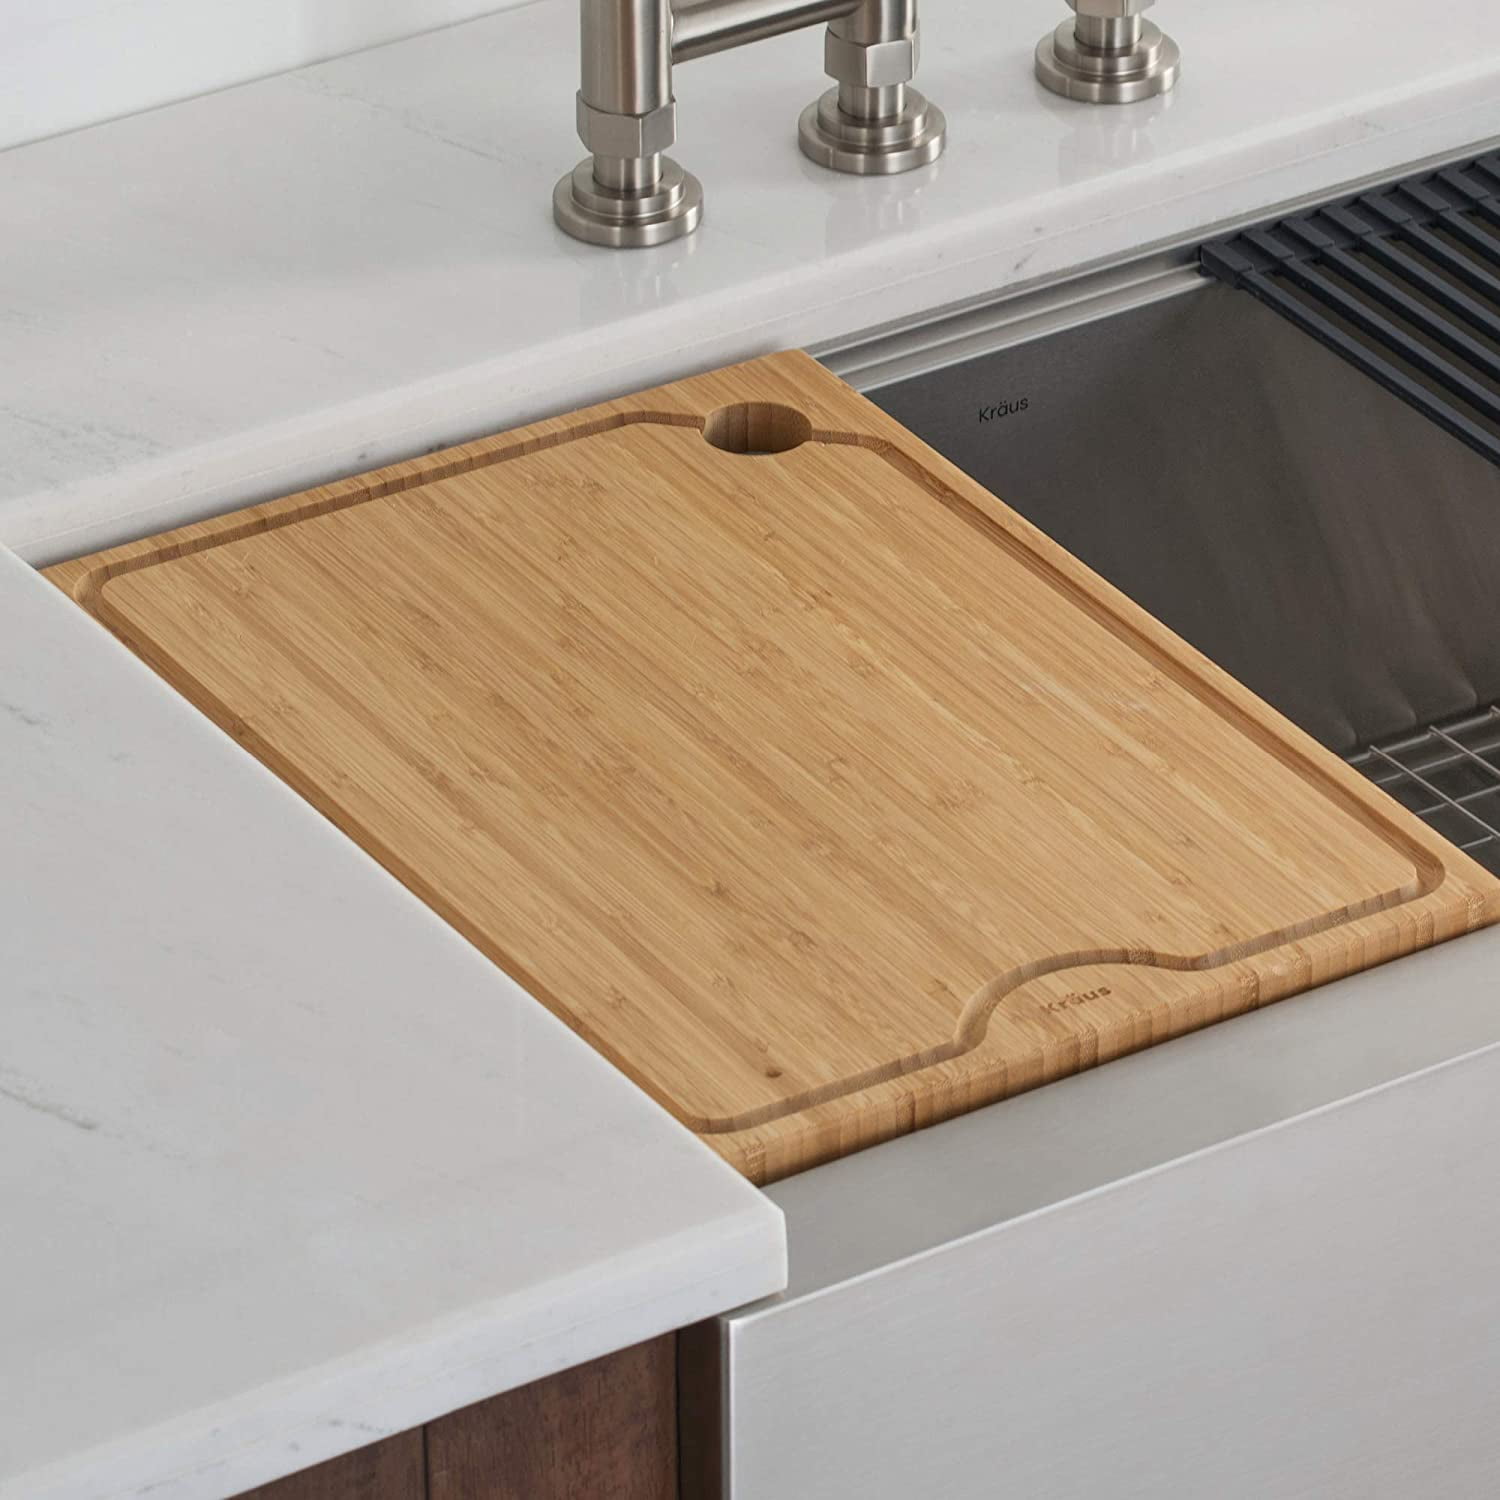 Kraus KCB-WS102BB Kore Cutting Board, 16.75 in, CUTTING BOARD DIMENSIONS: 16 3/4 in. L x 10 3/4 in. W – 1 YEAR LIMITED with top-rated customer.., By Visit the Kraus Store